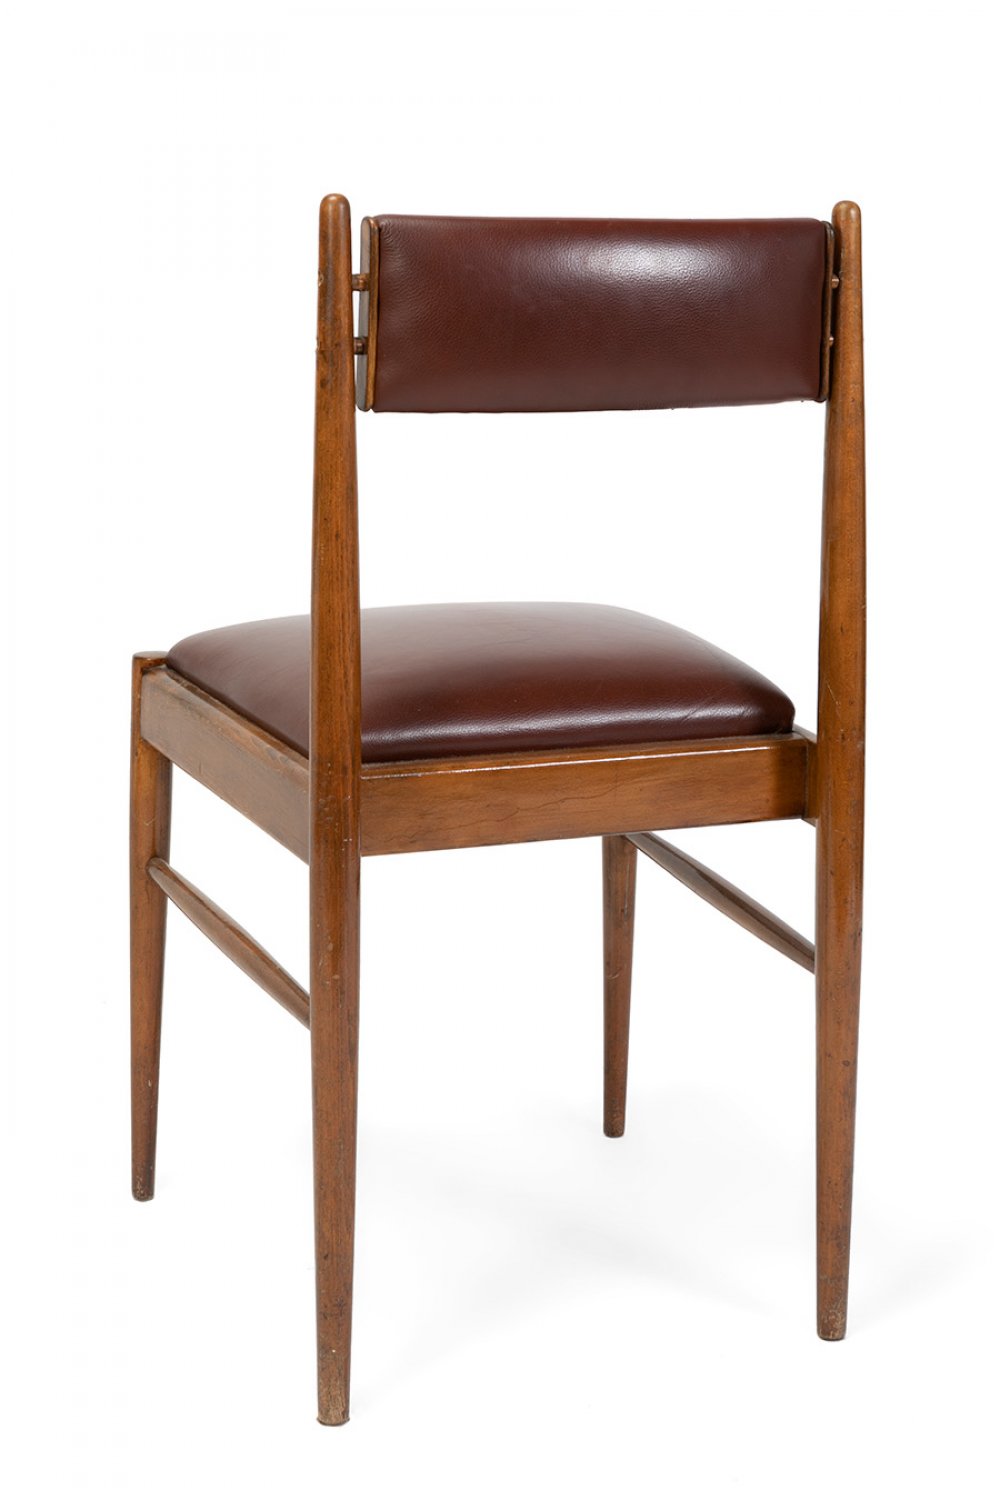 Set of six chairs, 1950s-60s.Beech wood frame and leather upholstery.In need of refinishing. - Image 5 of 5